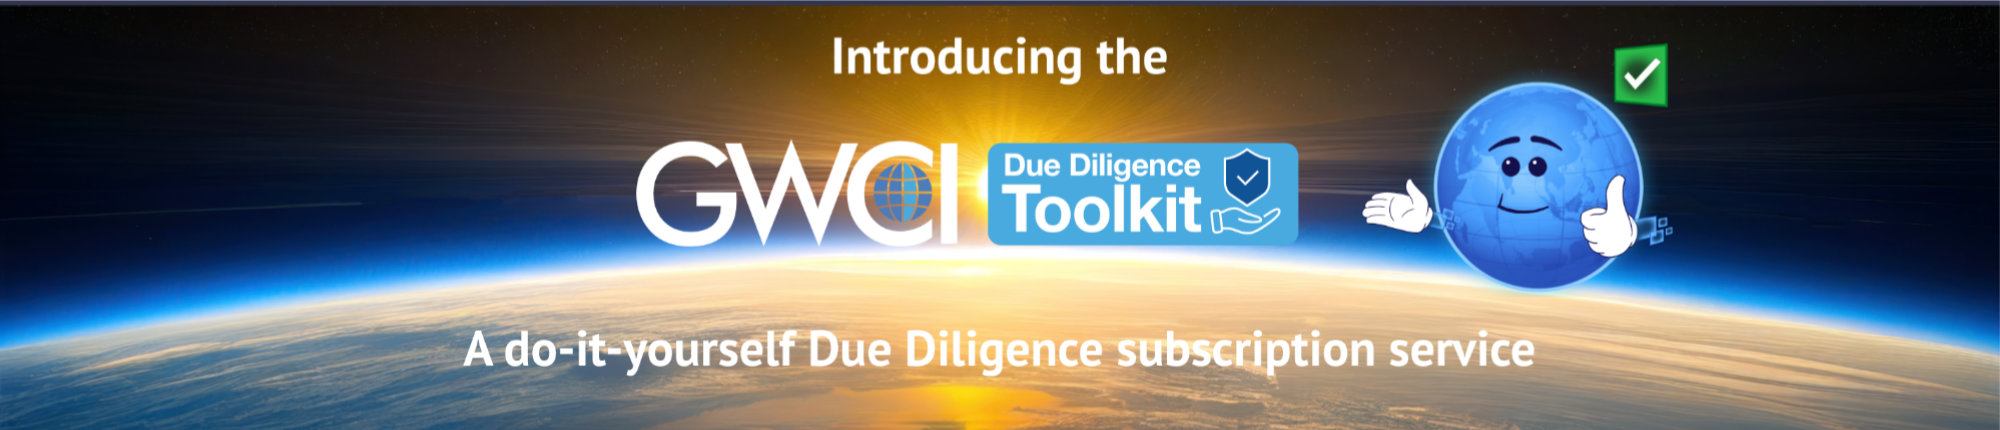 Introducing the GWCI DIY Due Diligence Toolkit